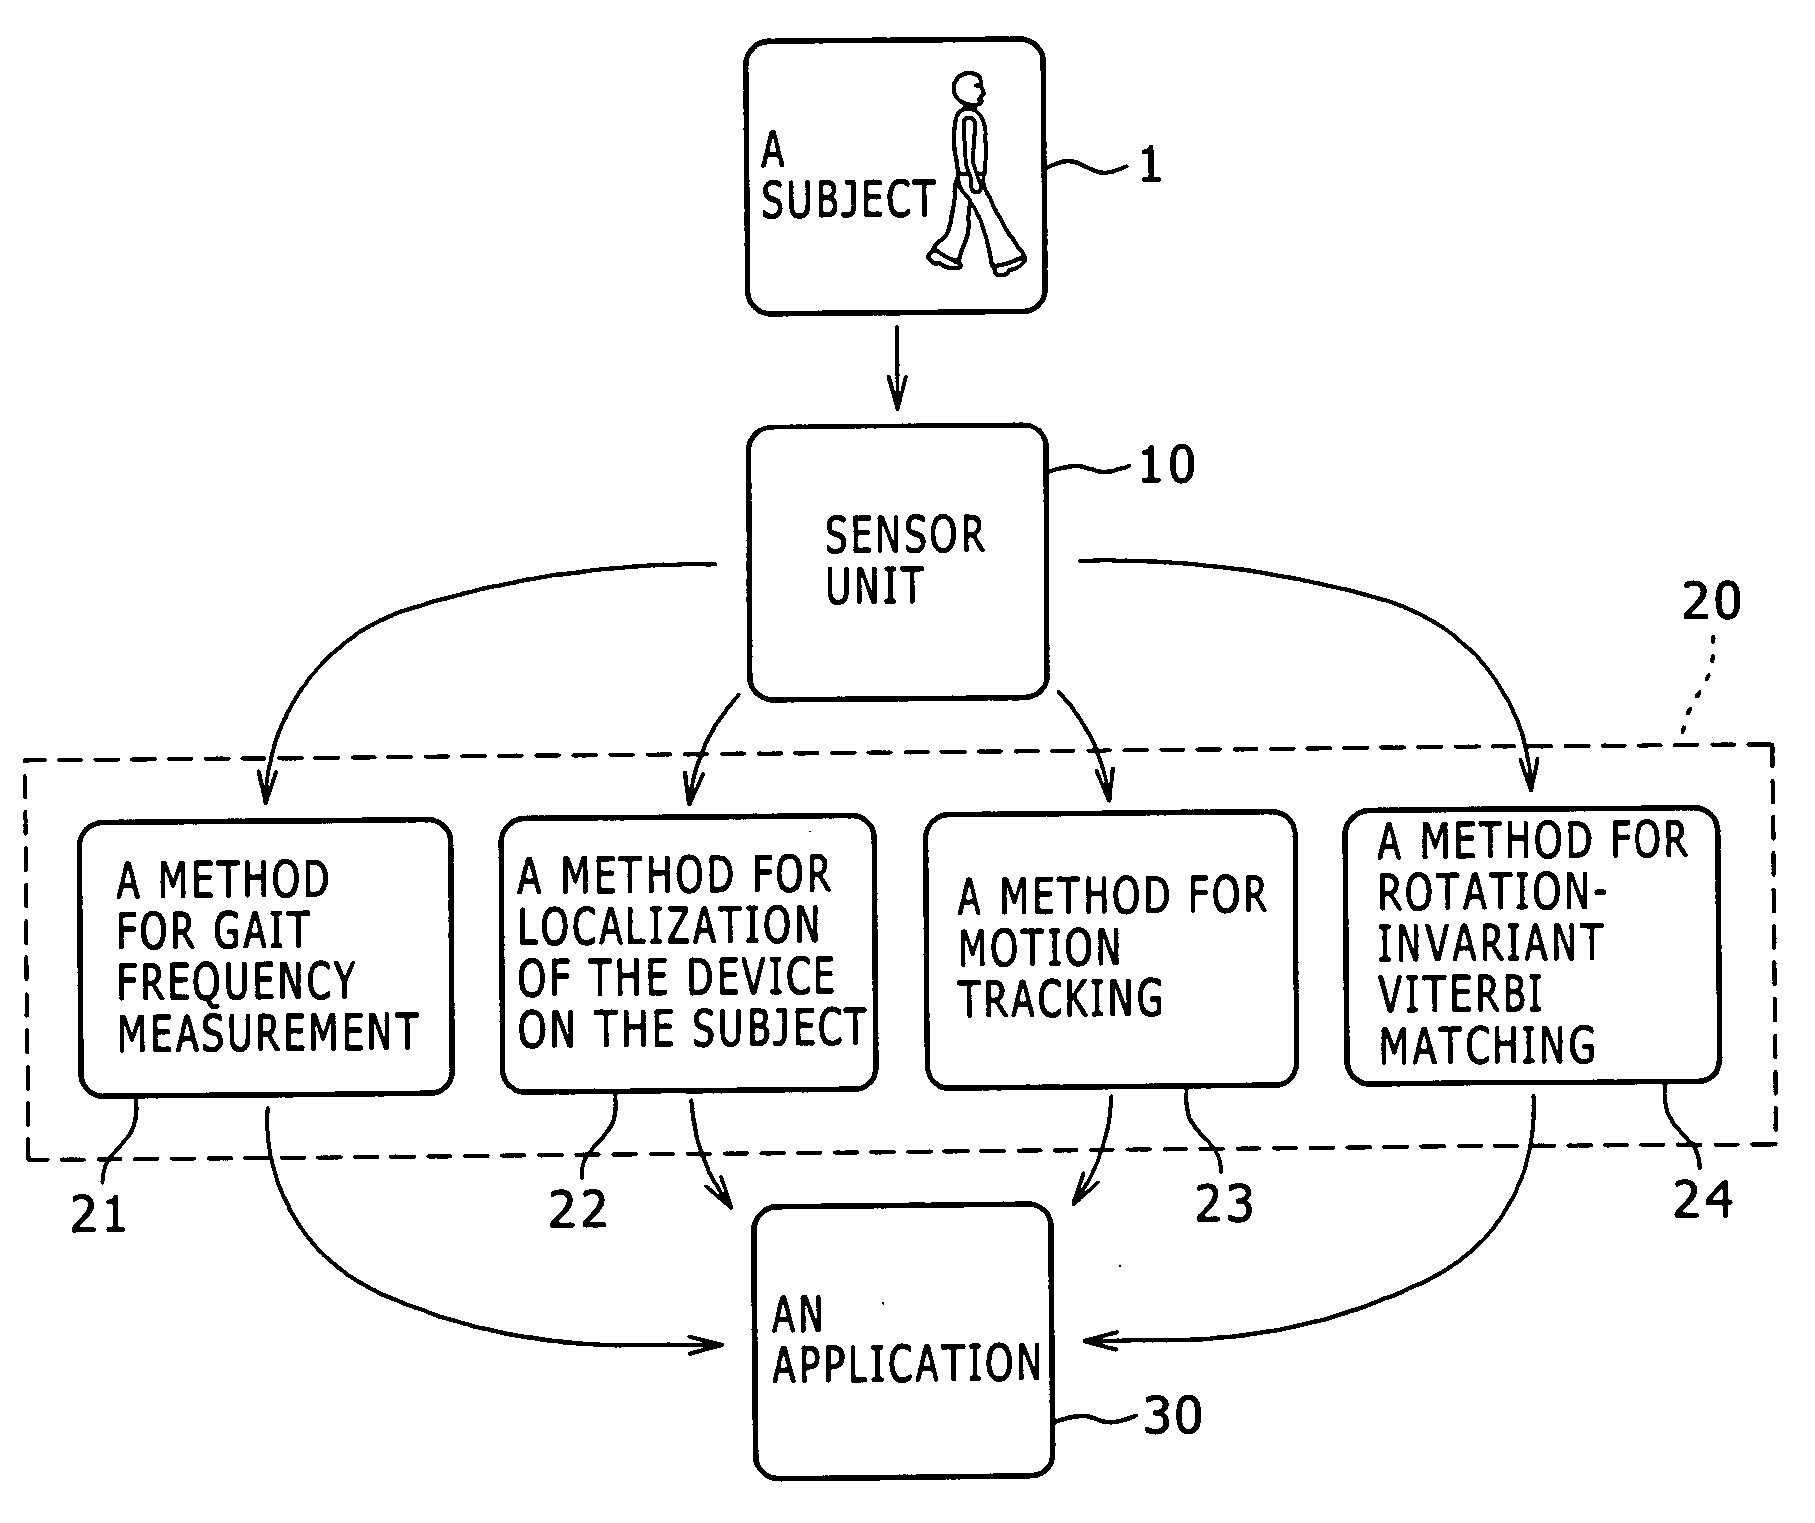 Activity recognition apparatus, method and program